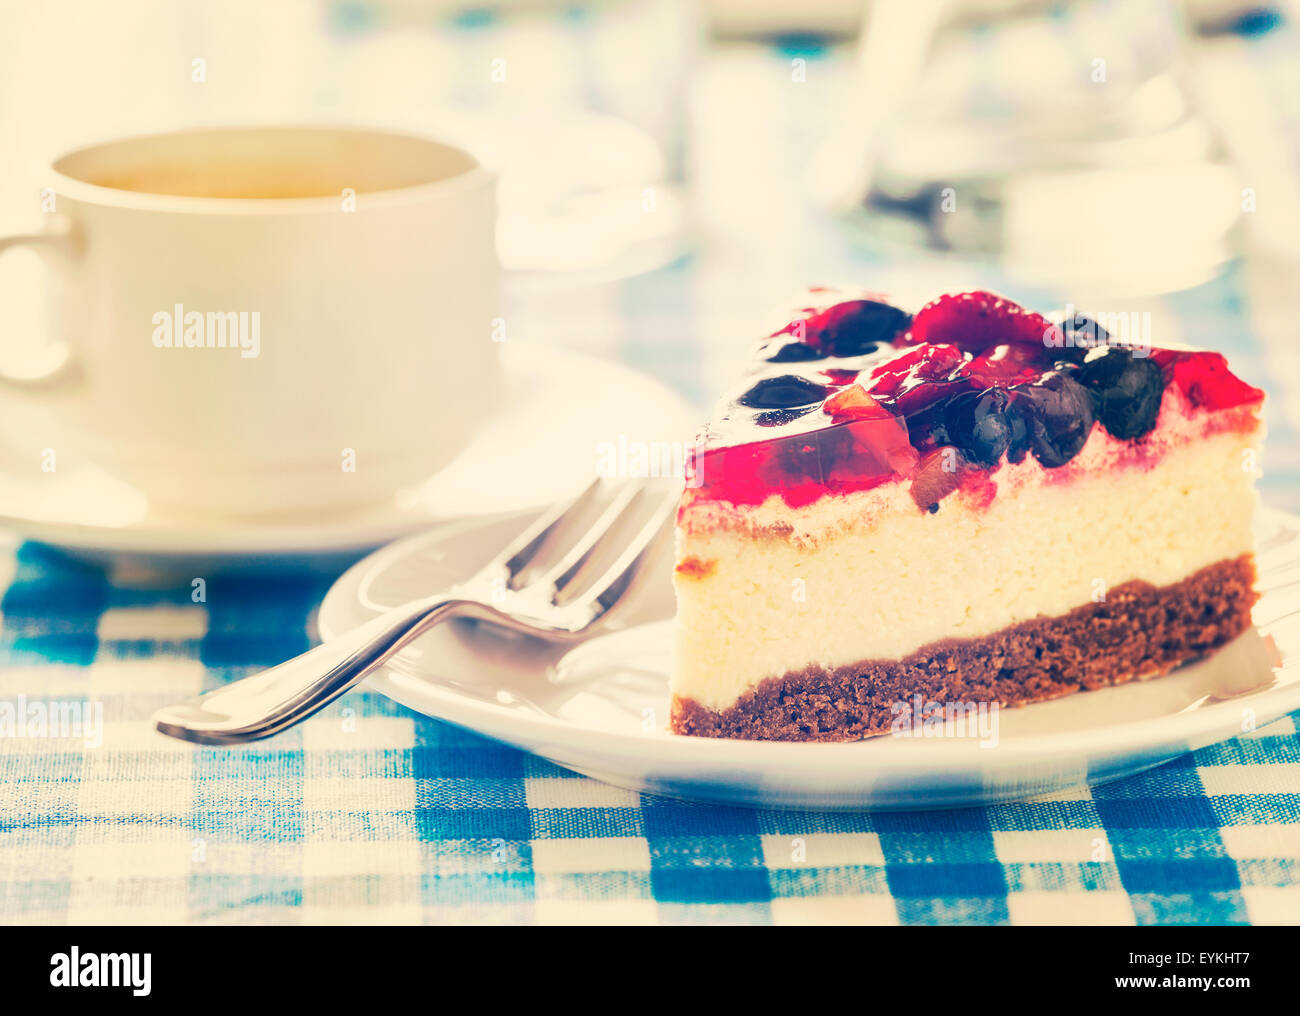 Vintage retro effect filtered hipster style image of dessert fruit cheese cake on plate with fork and coffee cup on blue checker Stock Photo